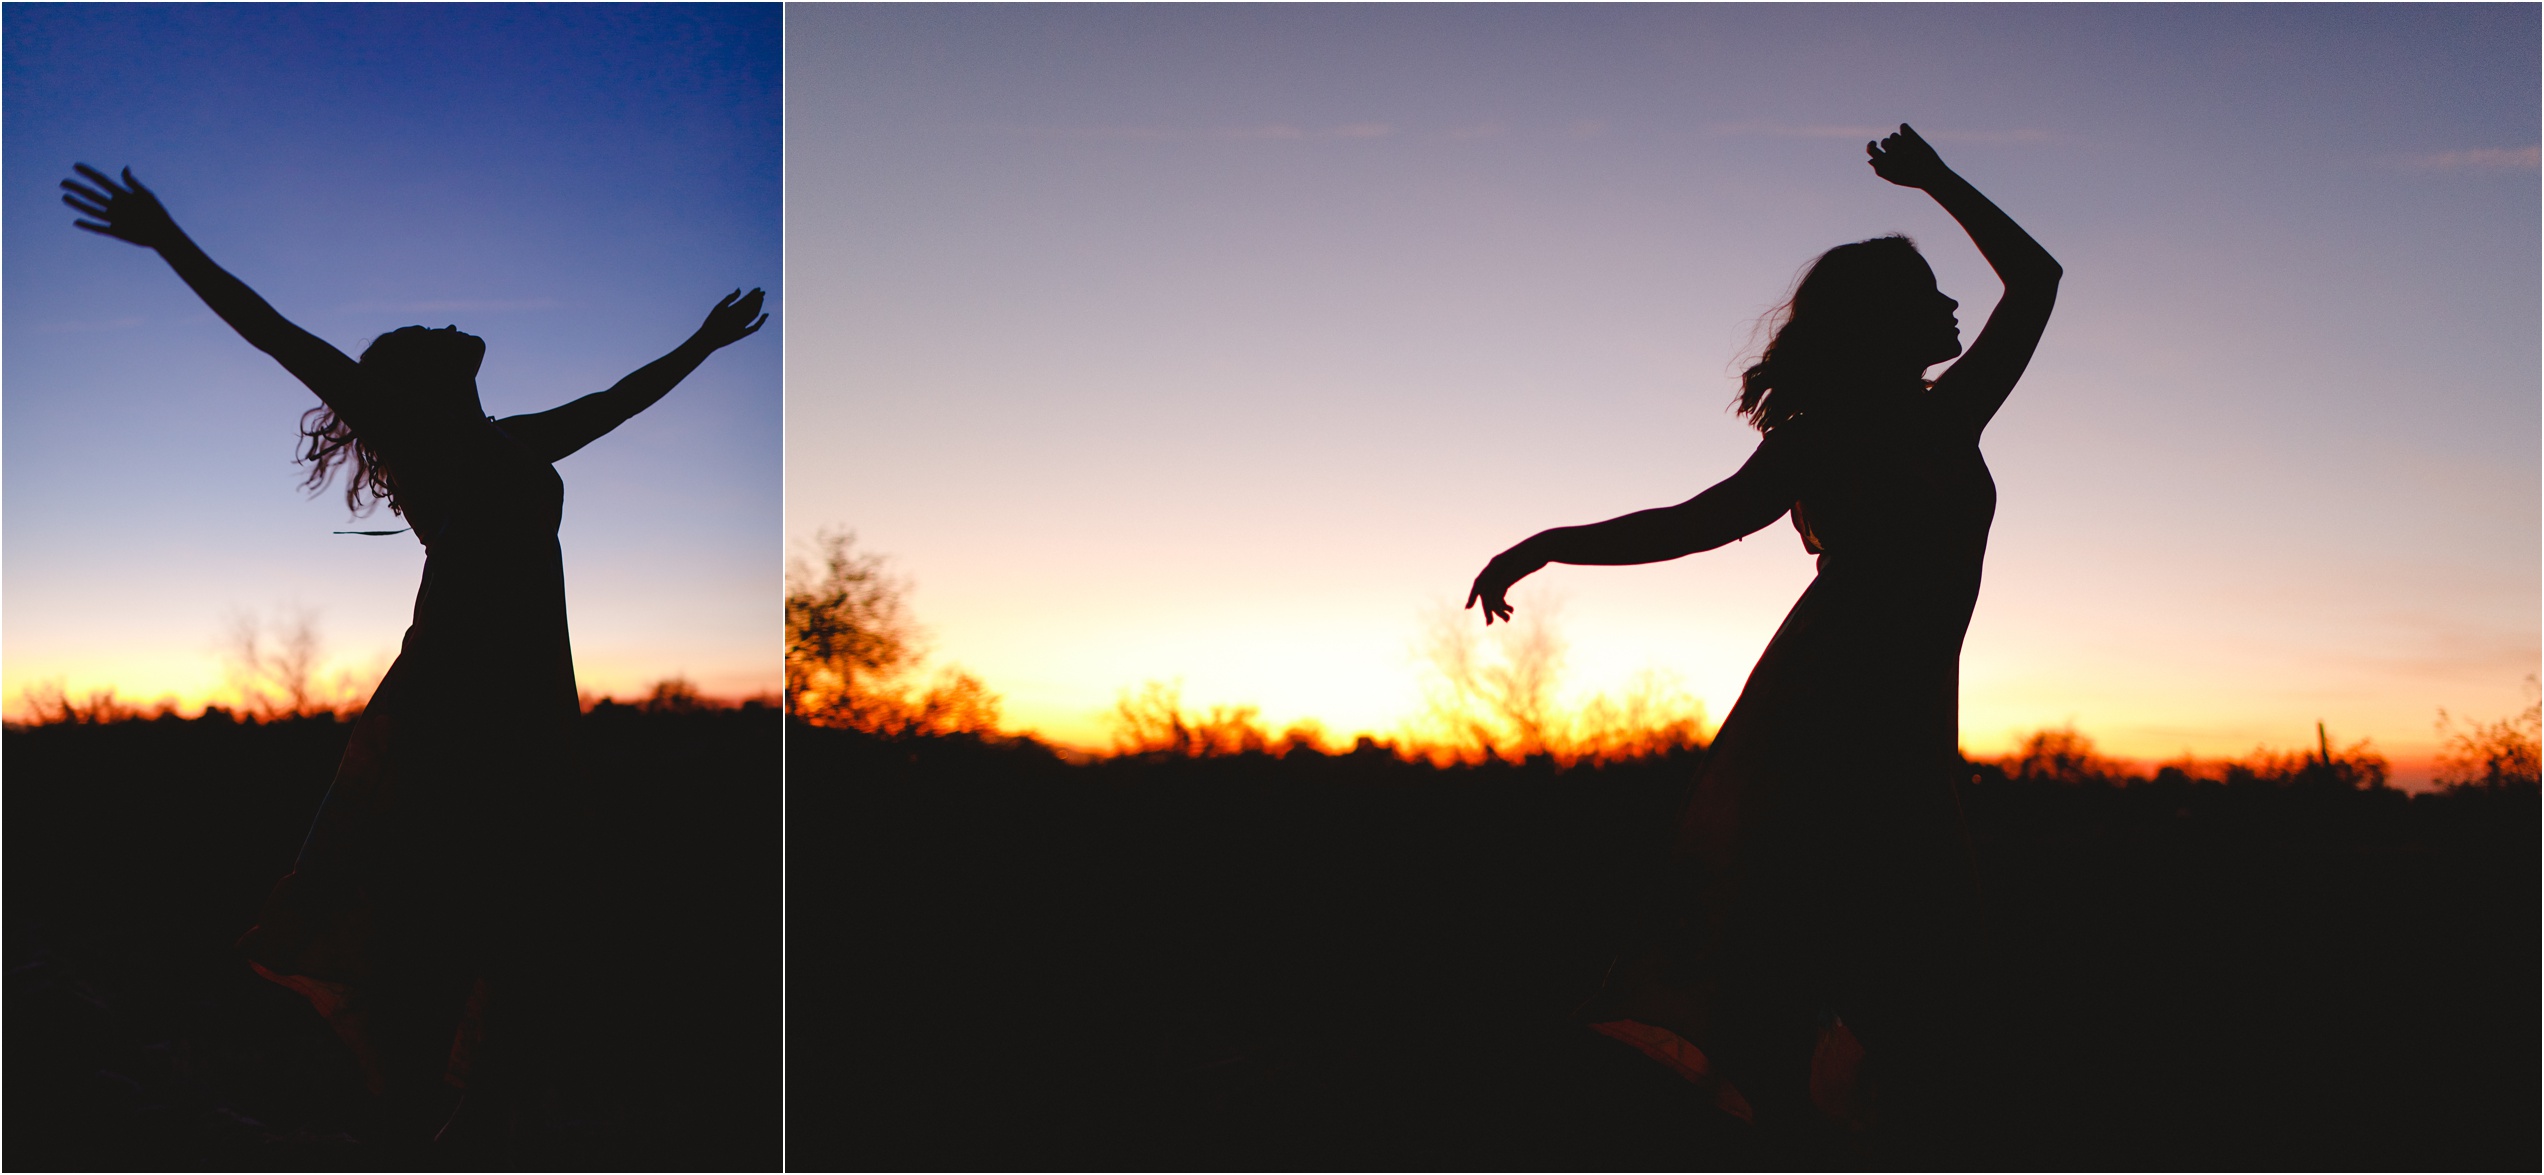 Silhouettes of Abby at sunset in the desert dancing during her senior photos with Slice of Lime Photography.